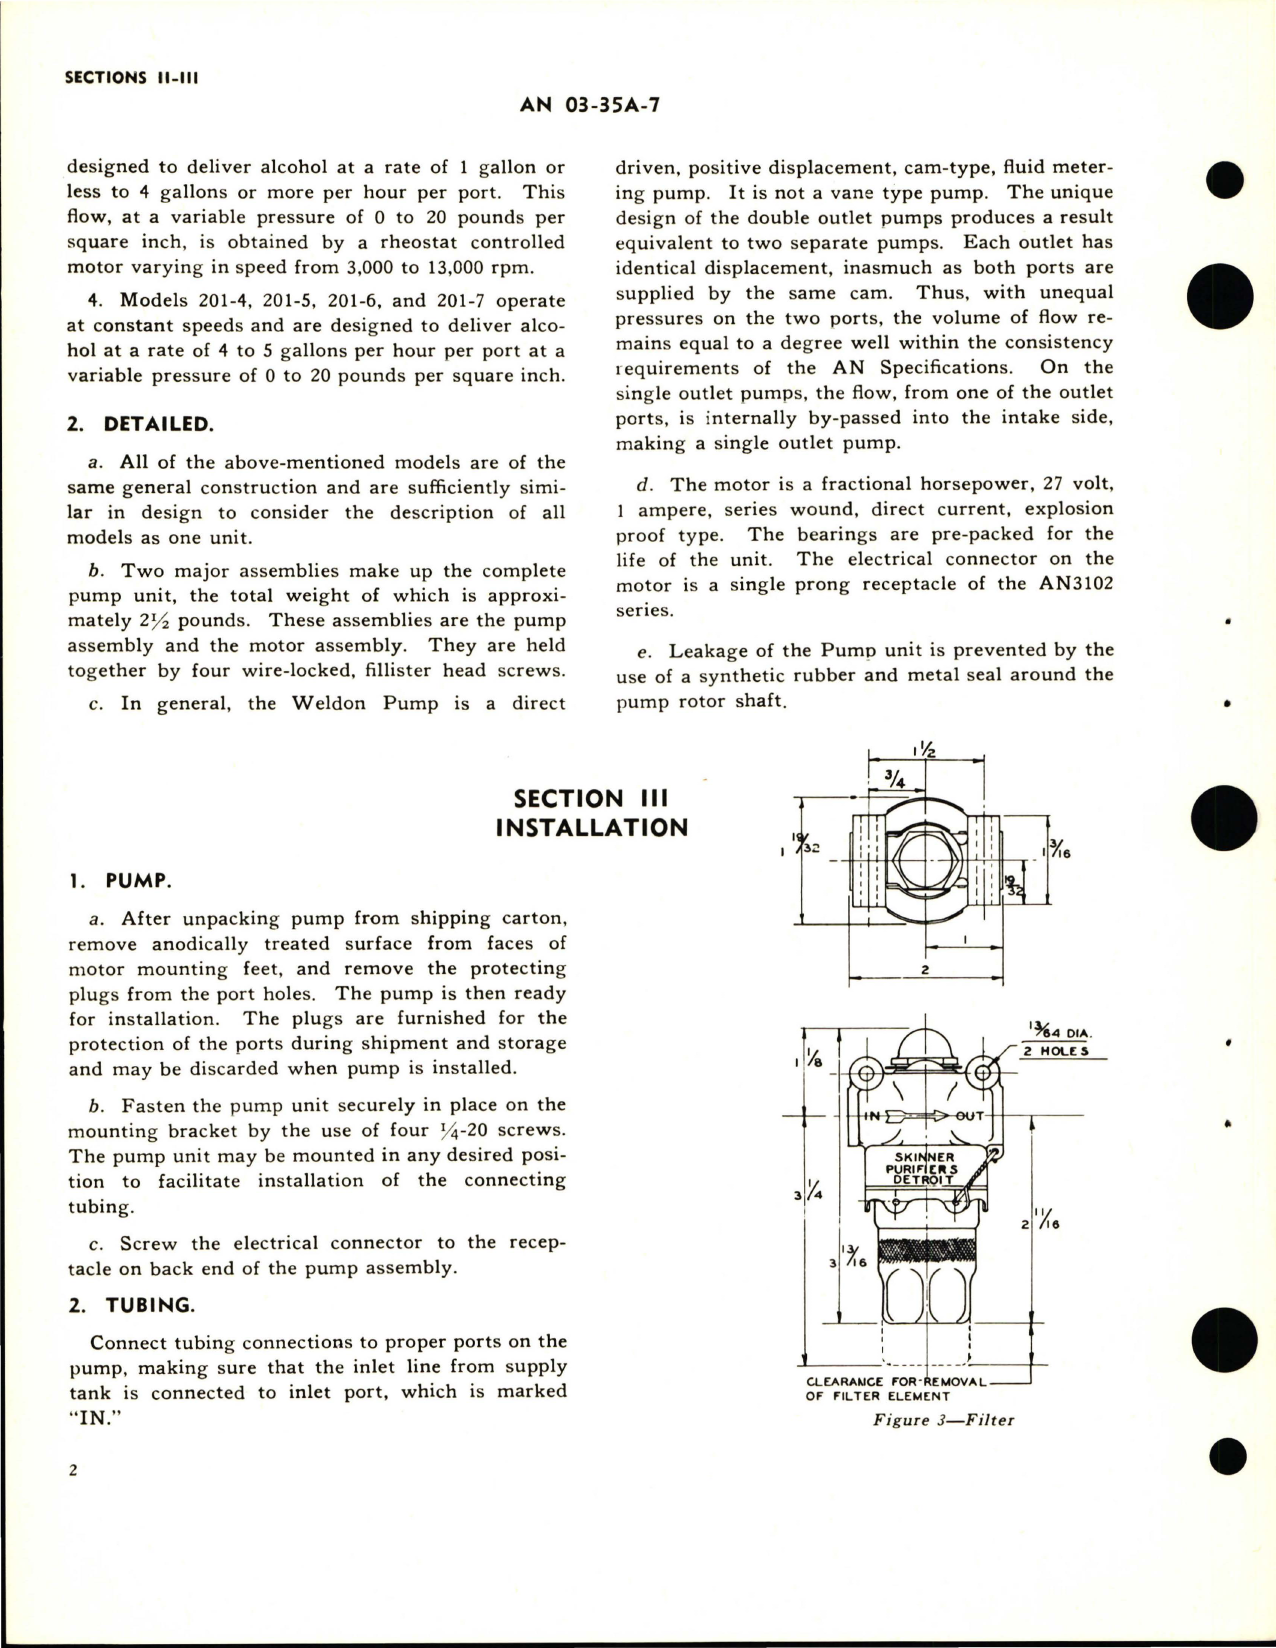 Sample page 6 from AirCorps Library document: Operation, Service and Overhaul Instructions with Parts Catalog for Anti-Icer Pumps - Double Outlet Models 